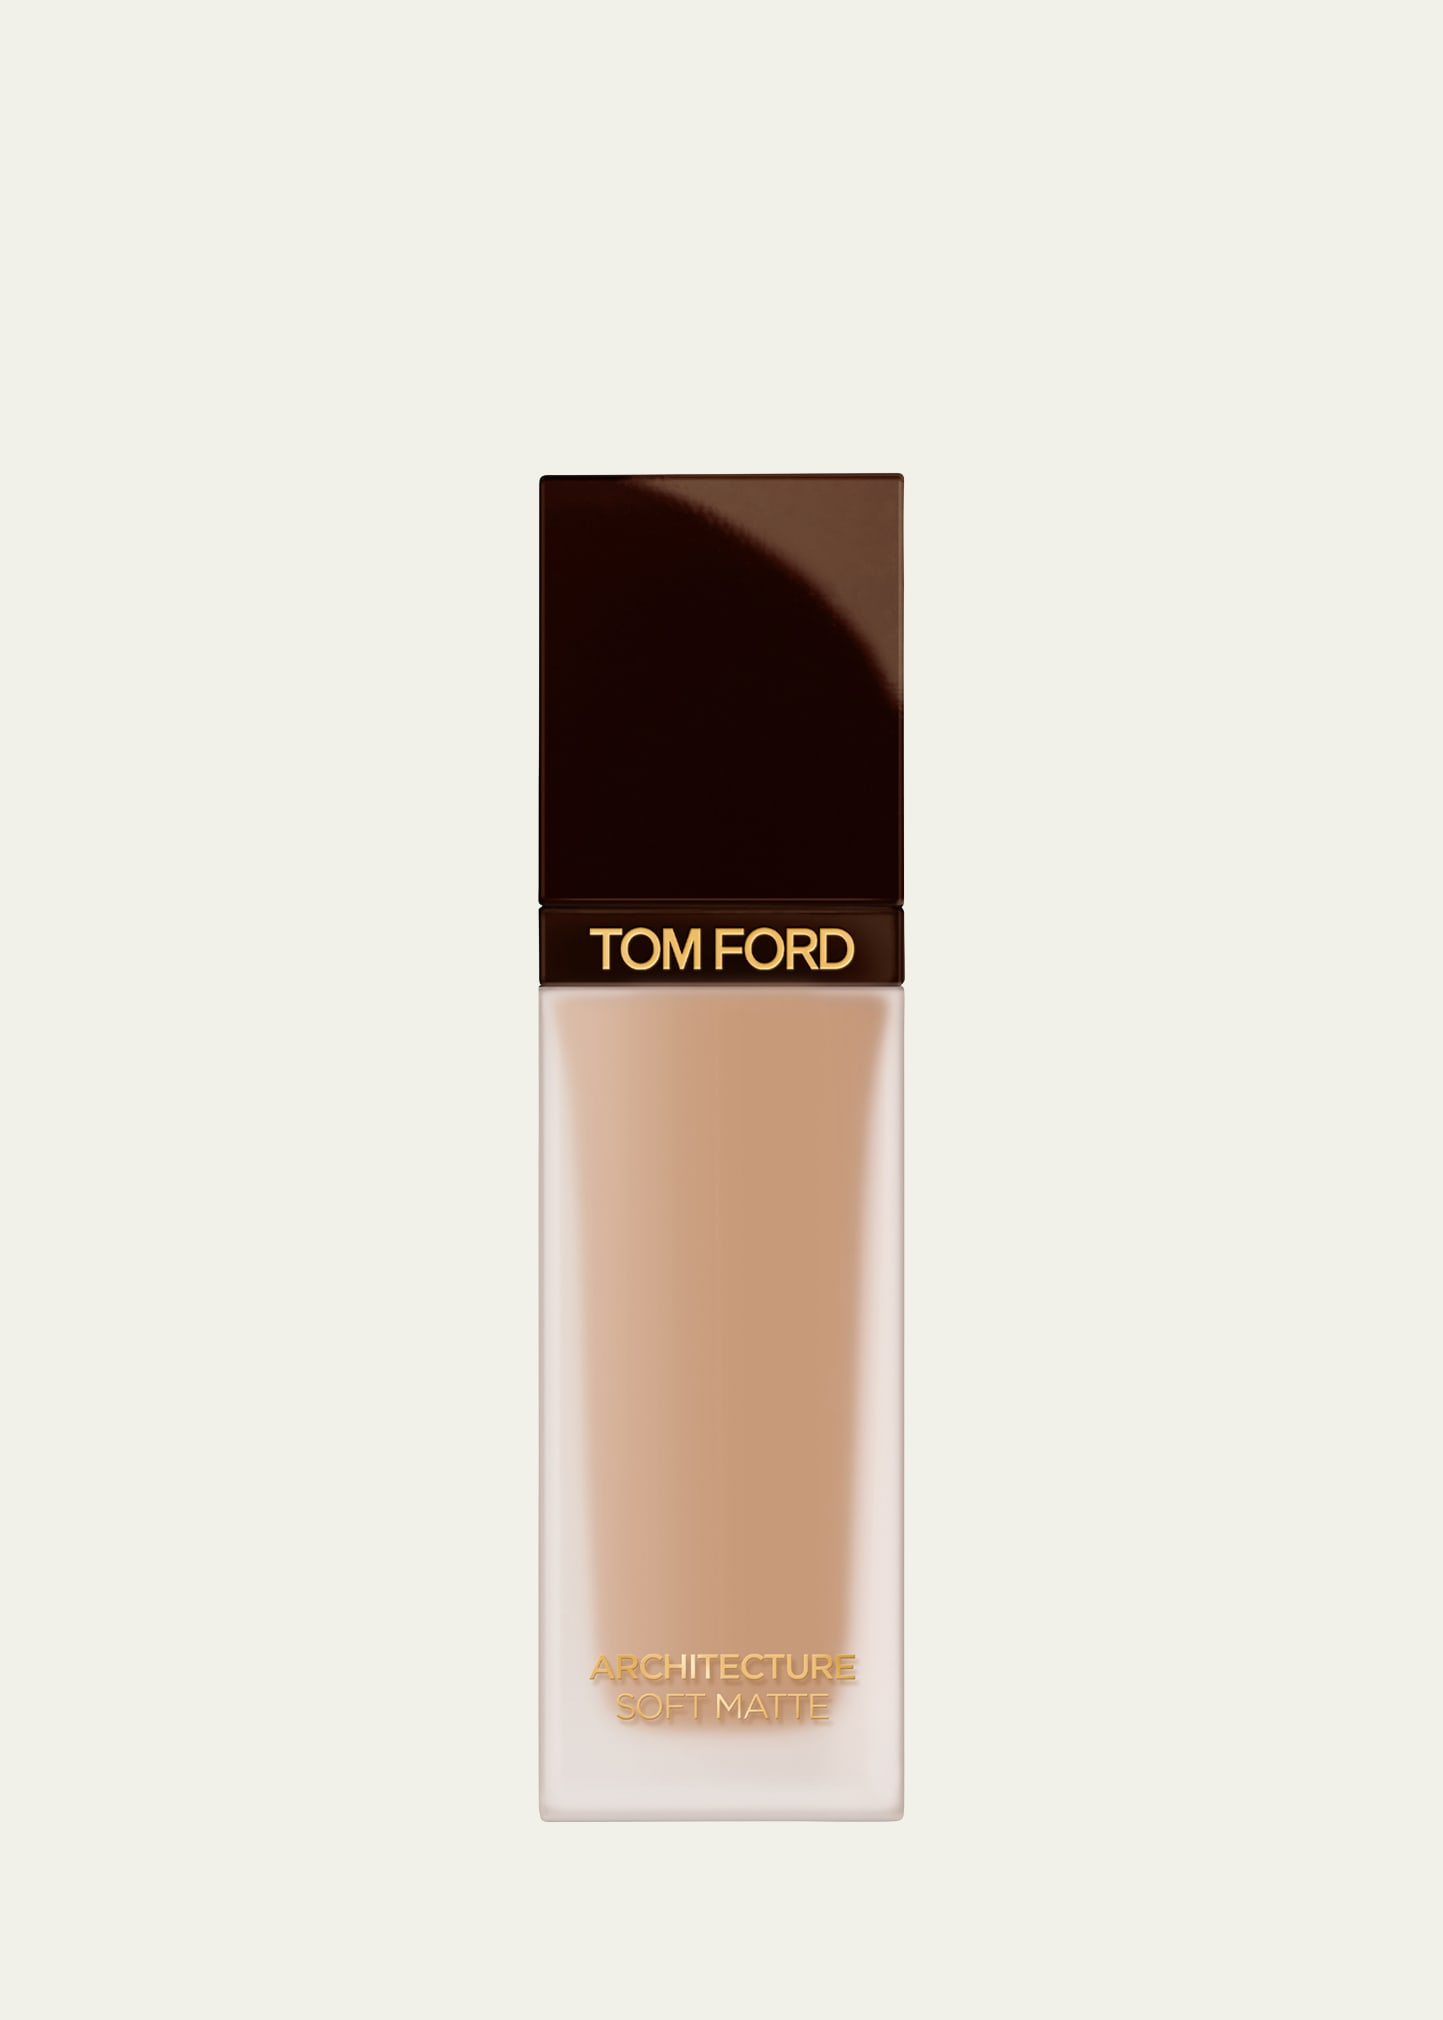 Tom Ford Architecture Soft Matte Foundation In Asm - 5.7 Dune